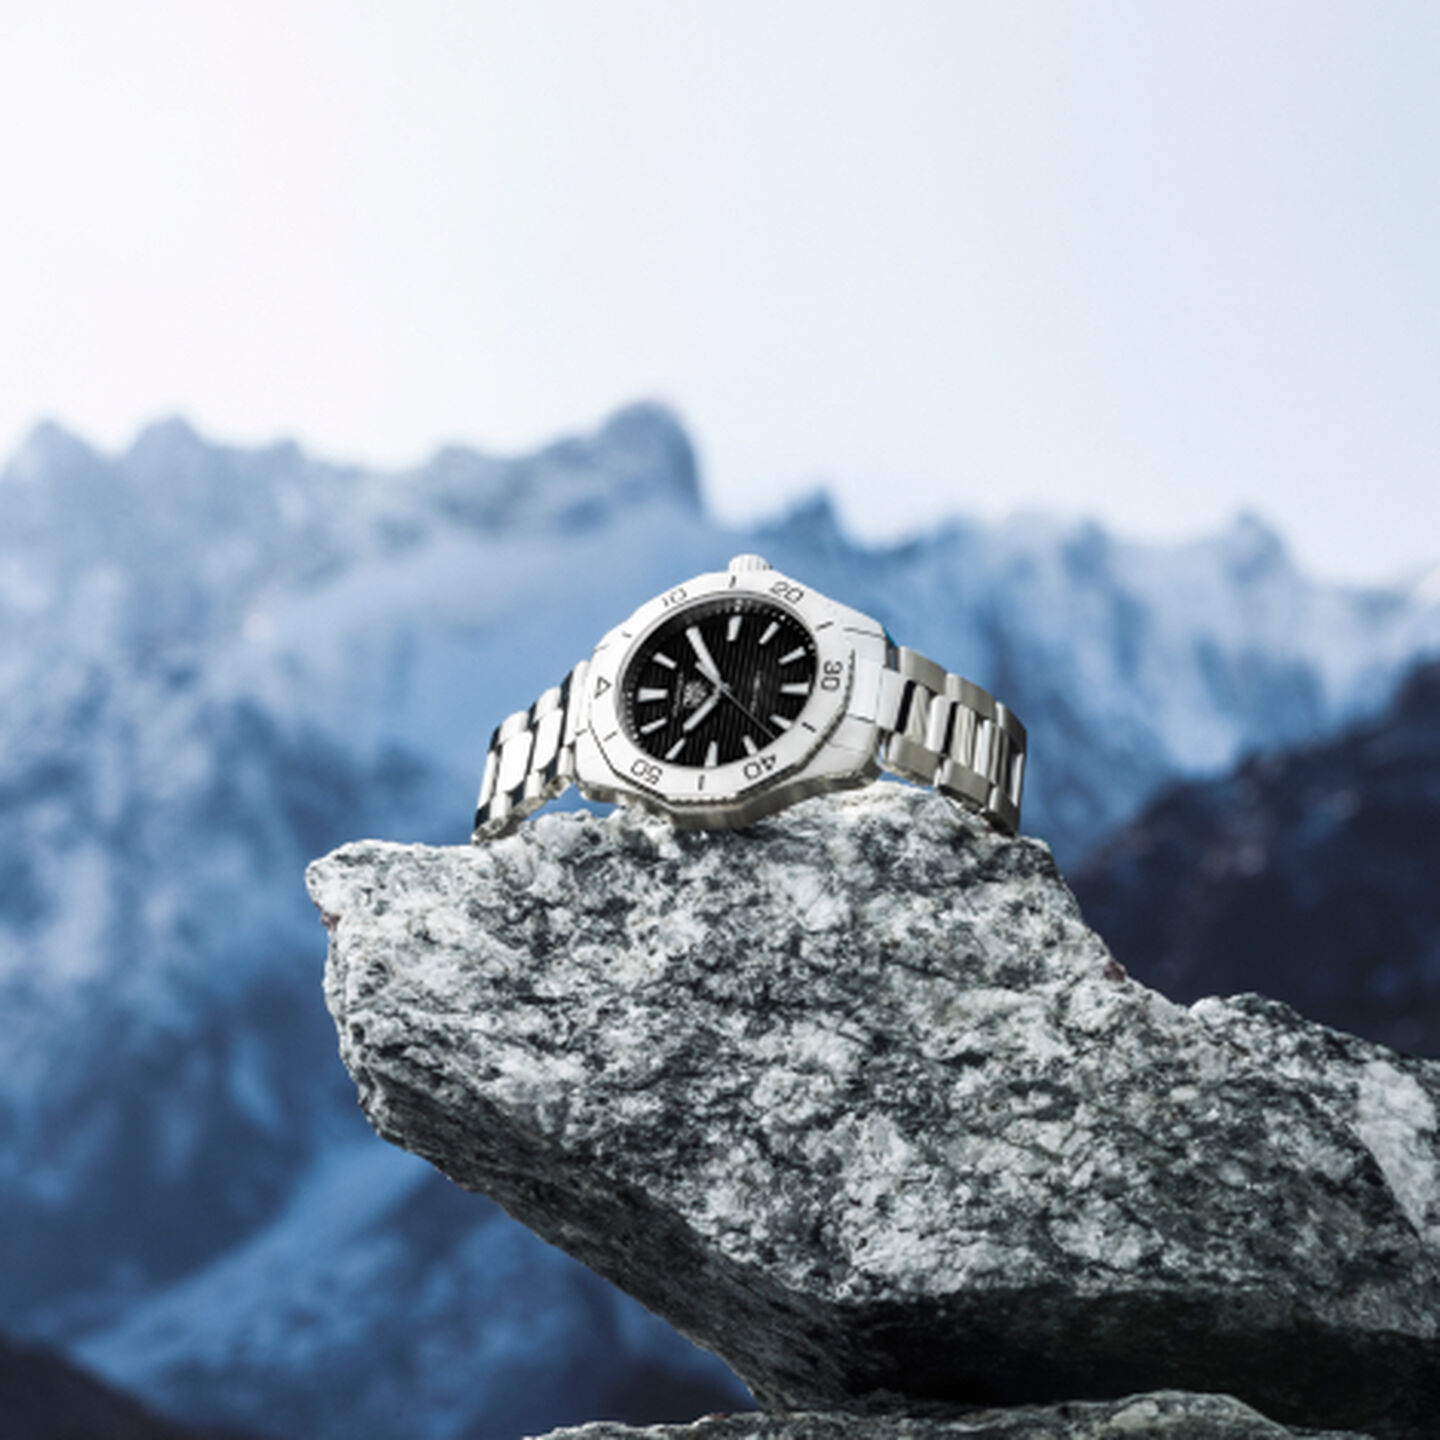 A TAG Heuer watch perched upon a rock overlooking snow covered mountains